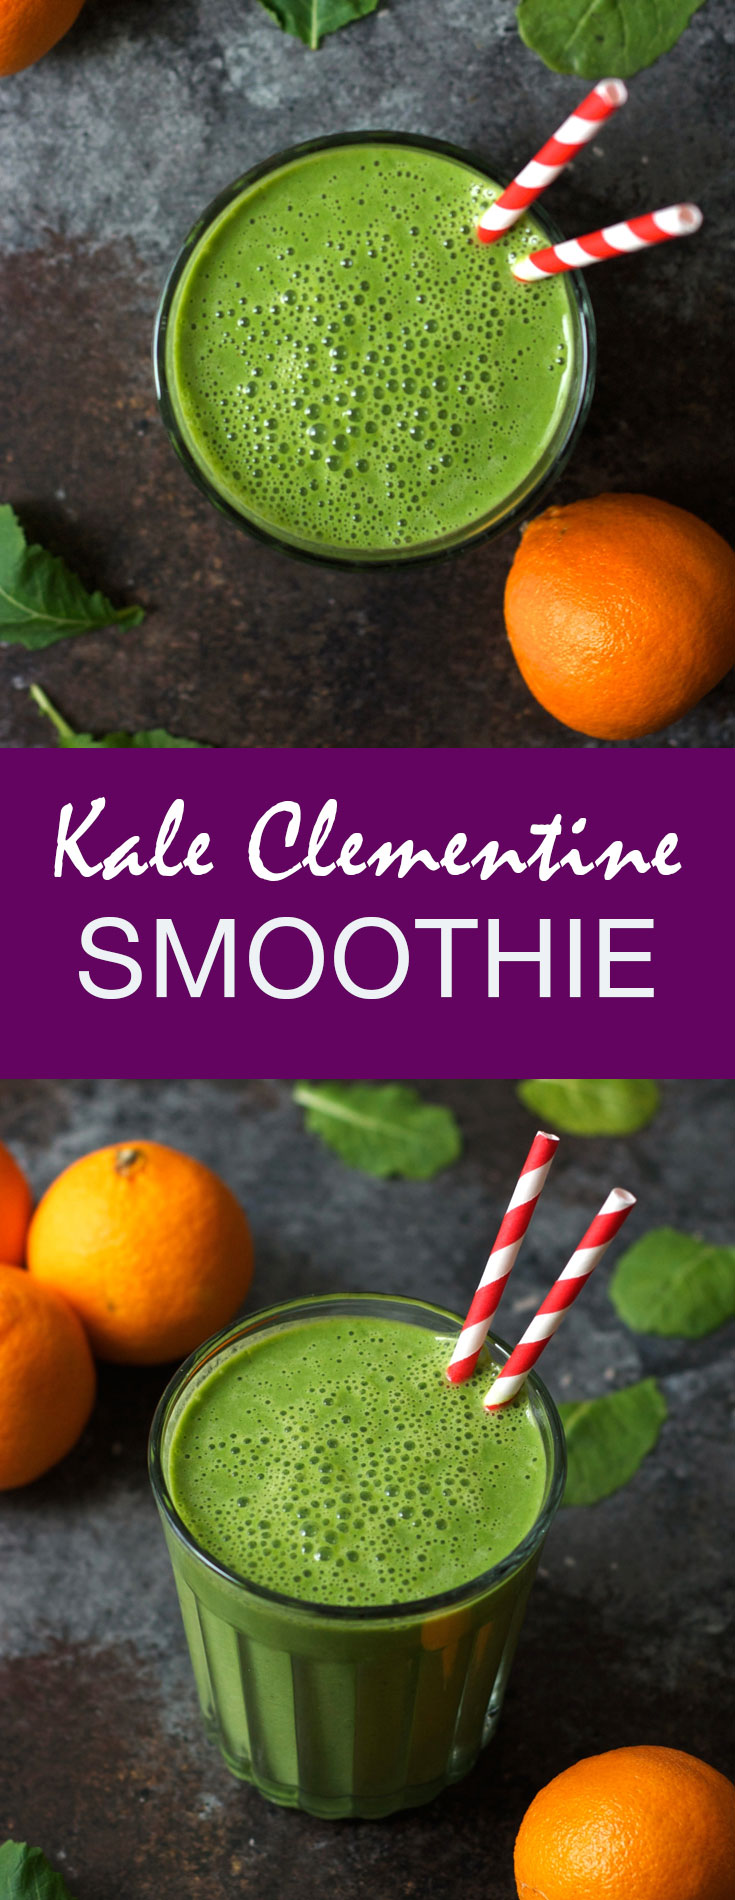 Kale Clementine Smoothie